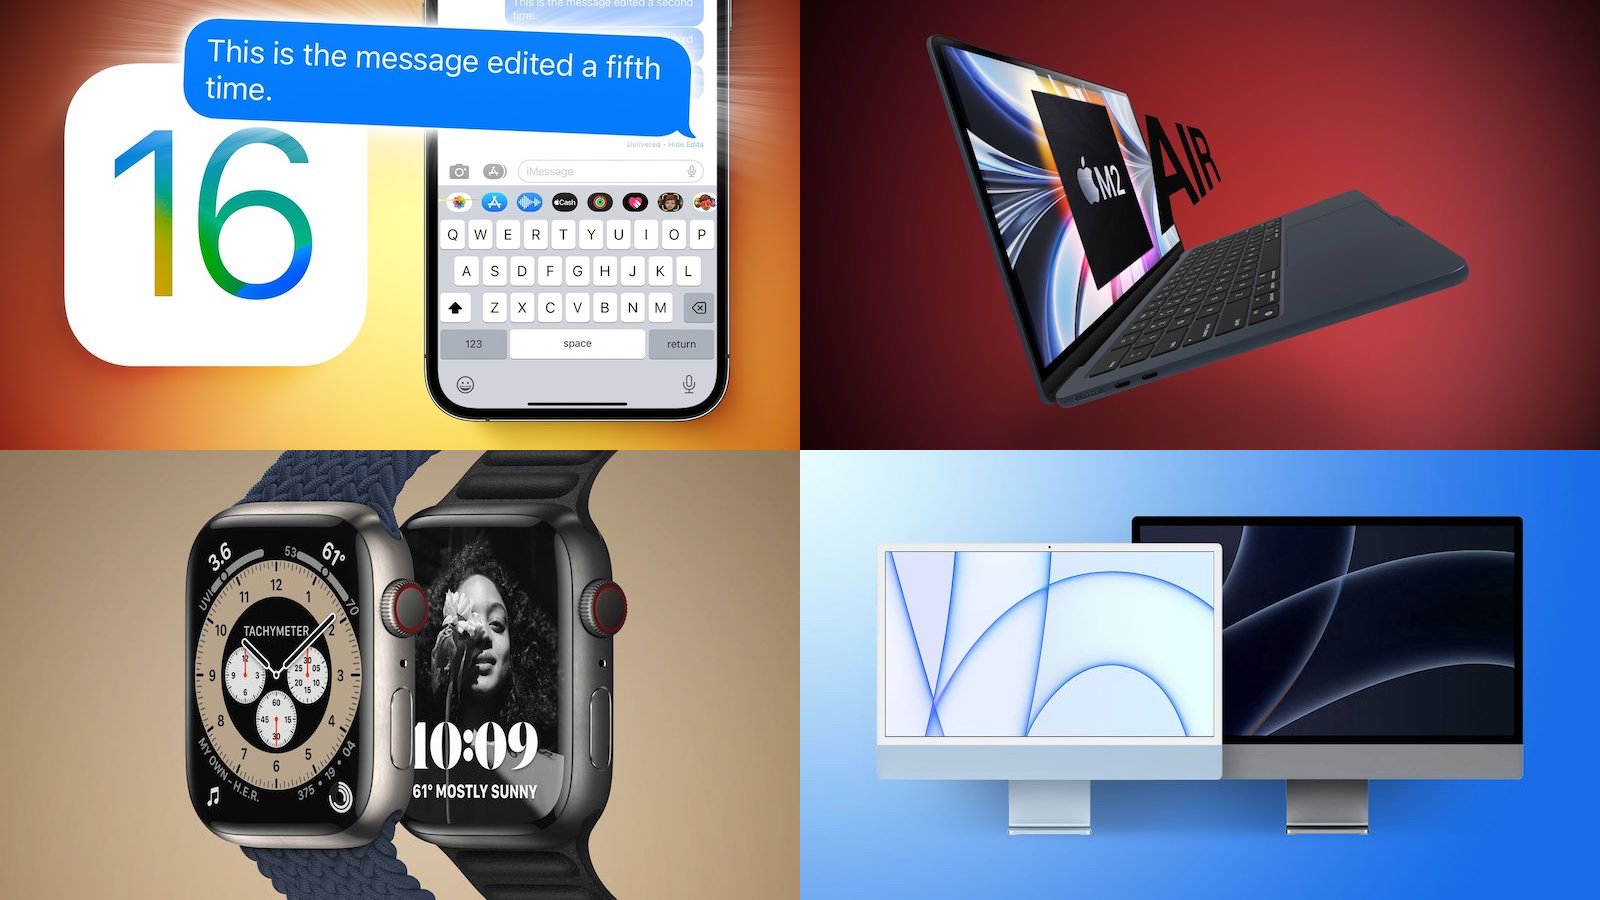 Top Stories: iOS 16 Beta 4, 'Apple Watch Pro' Rumors, and More